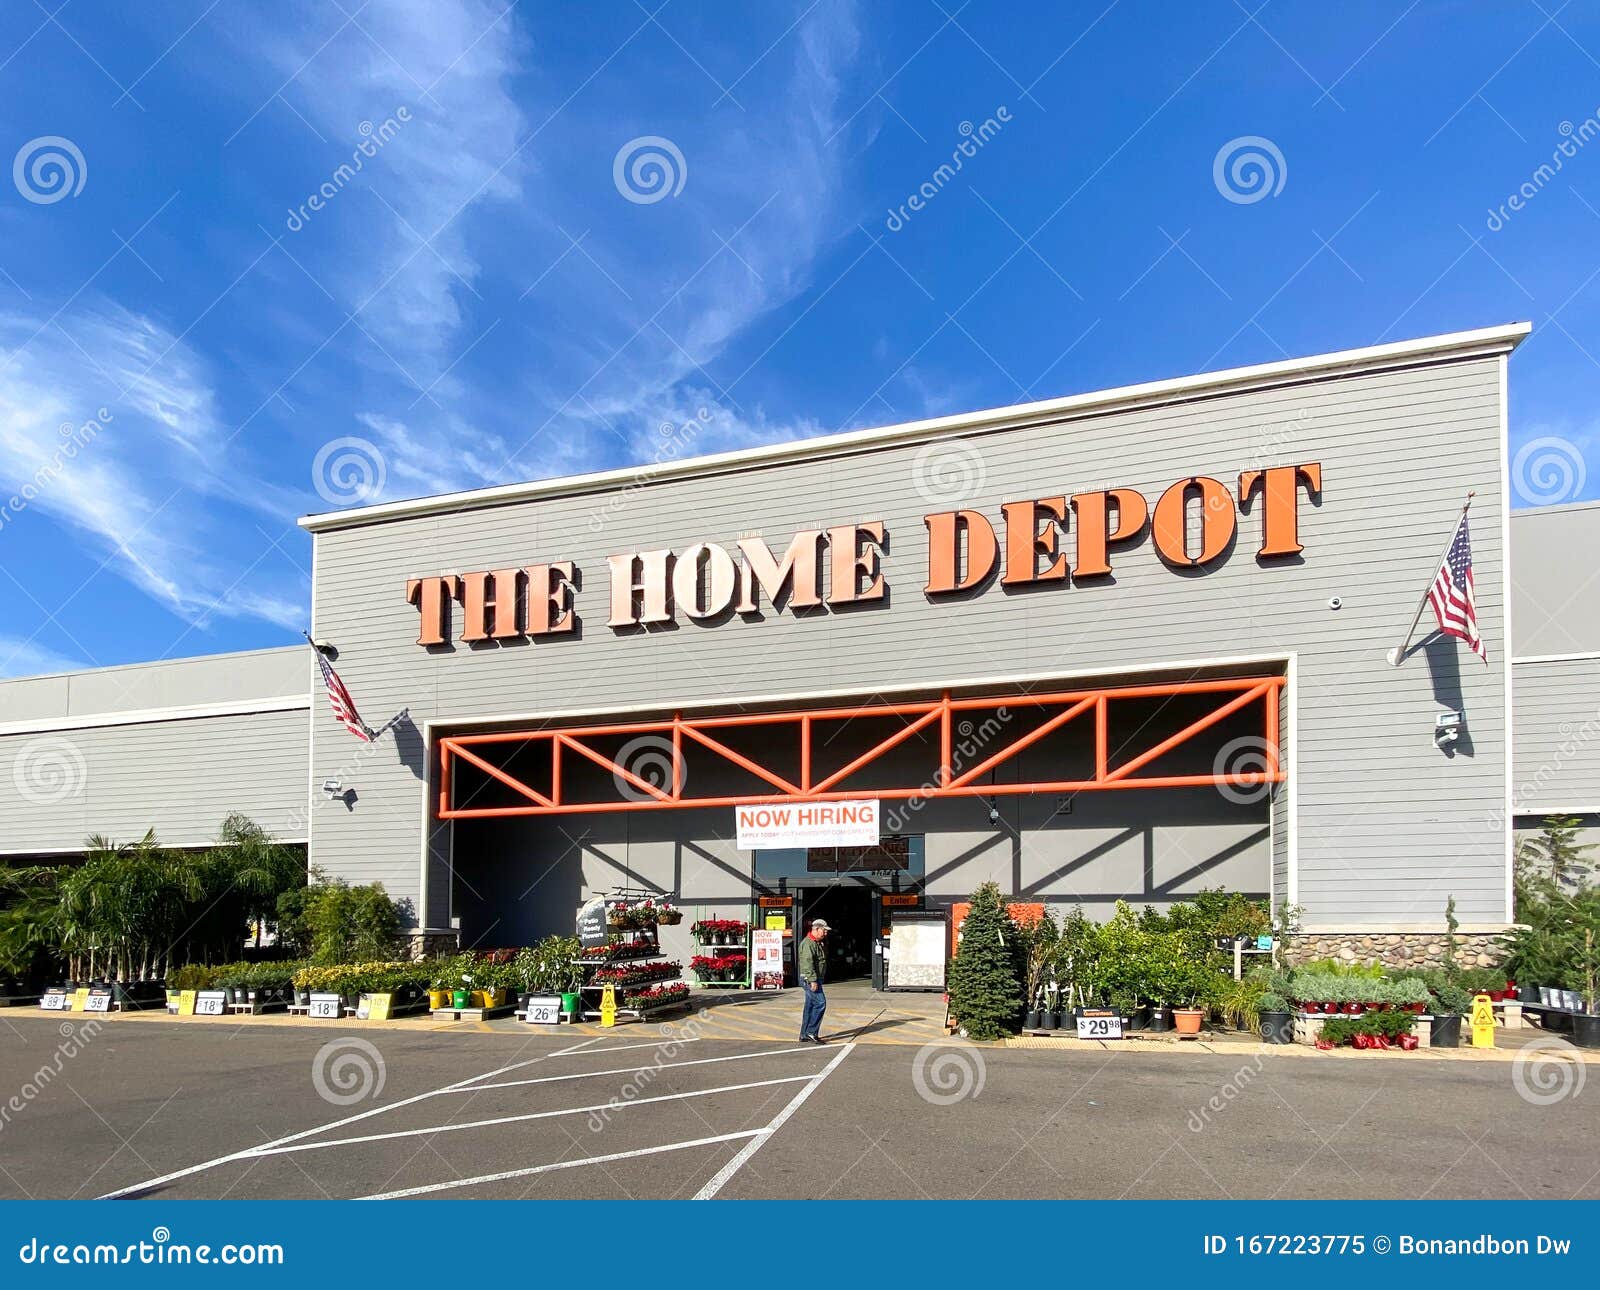 The Home Depot Store In San Diego California Usa Editorial Image Image Of Large Home